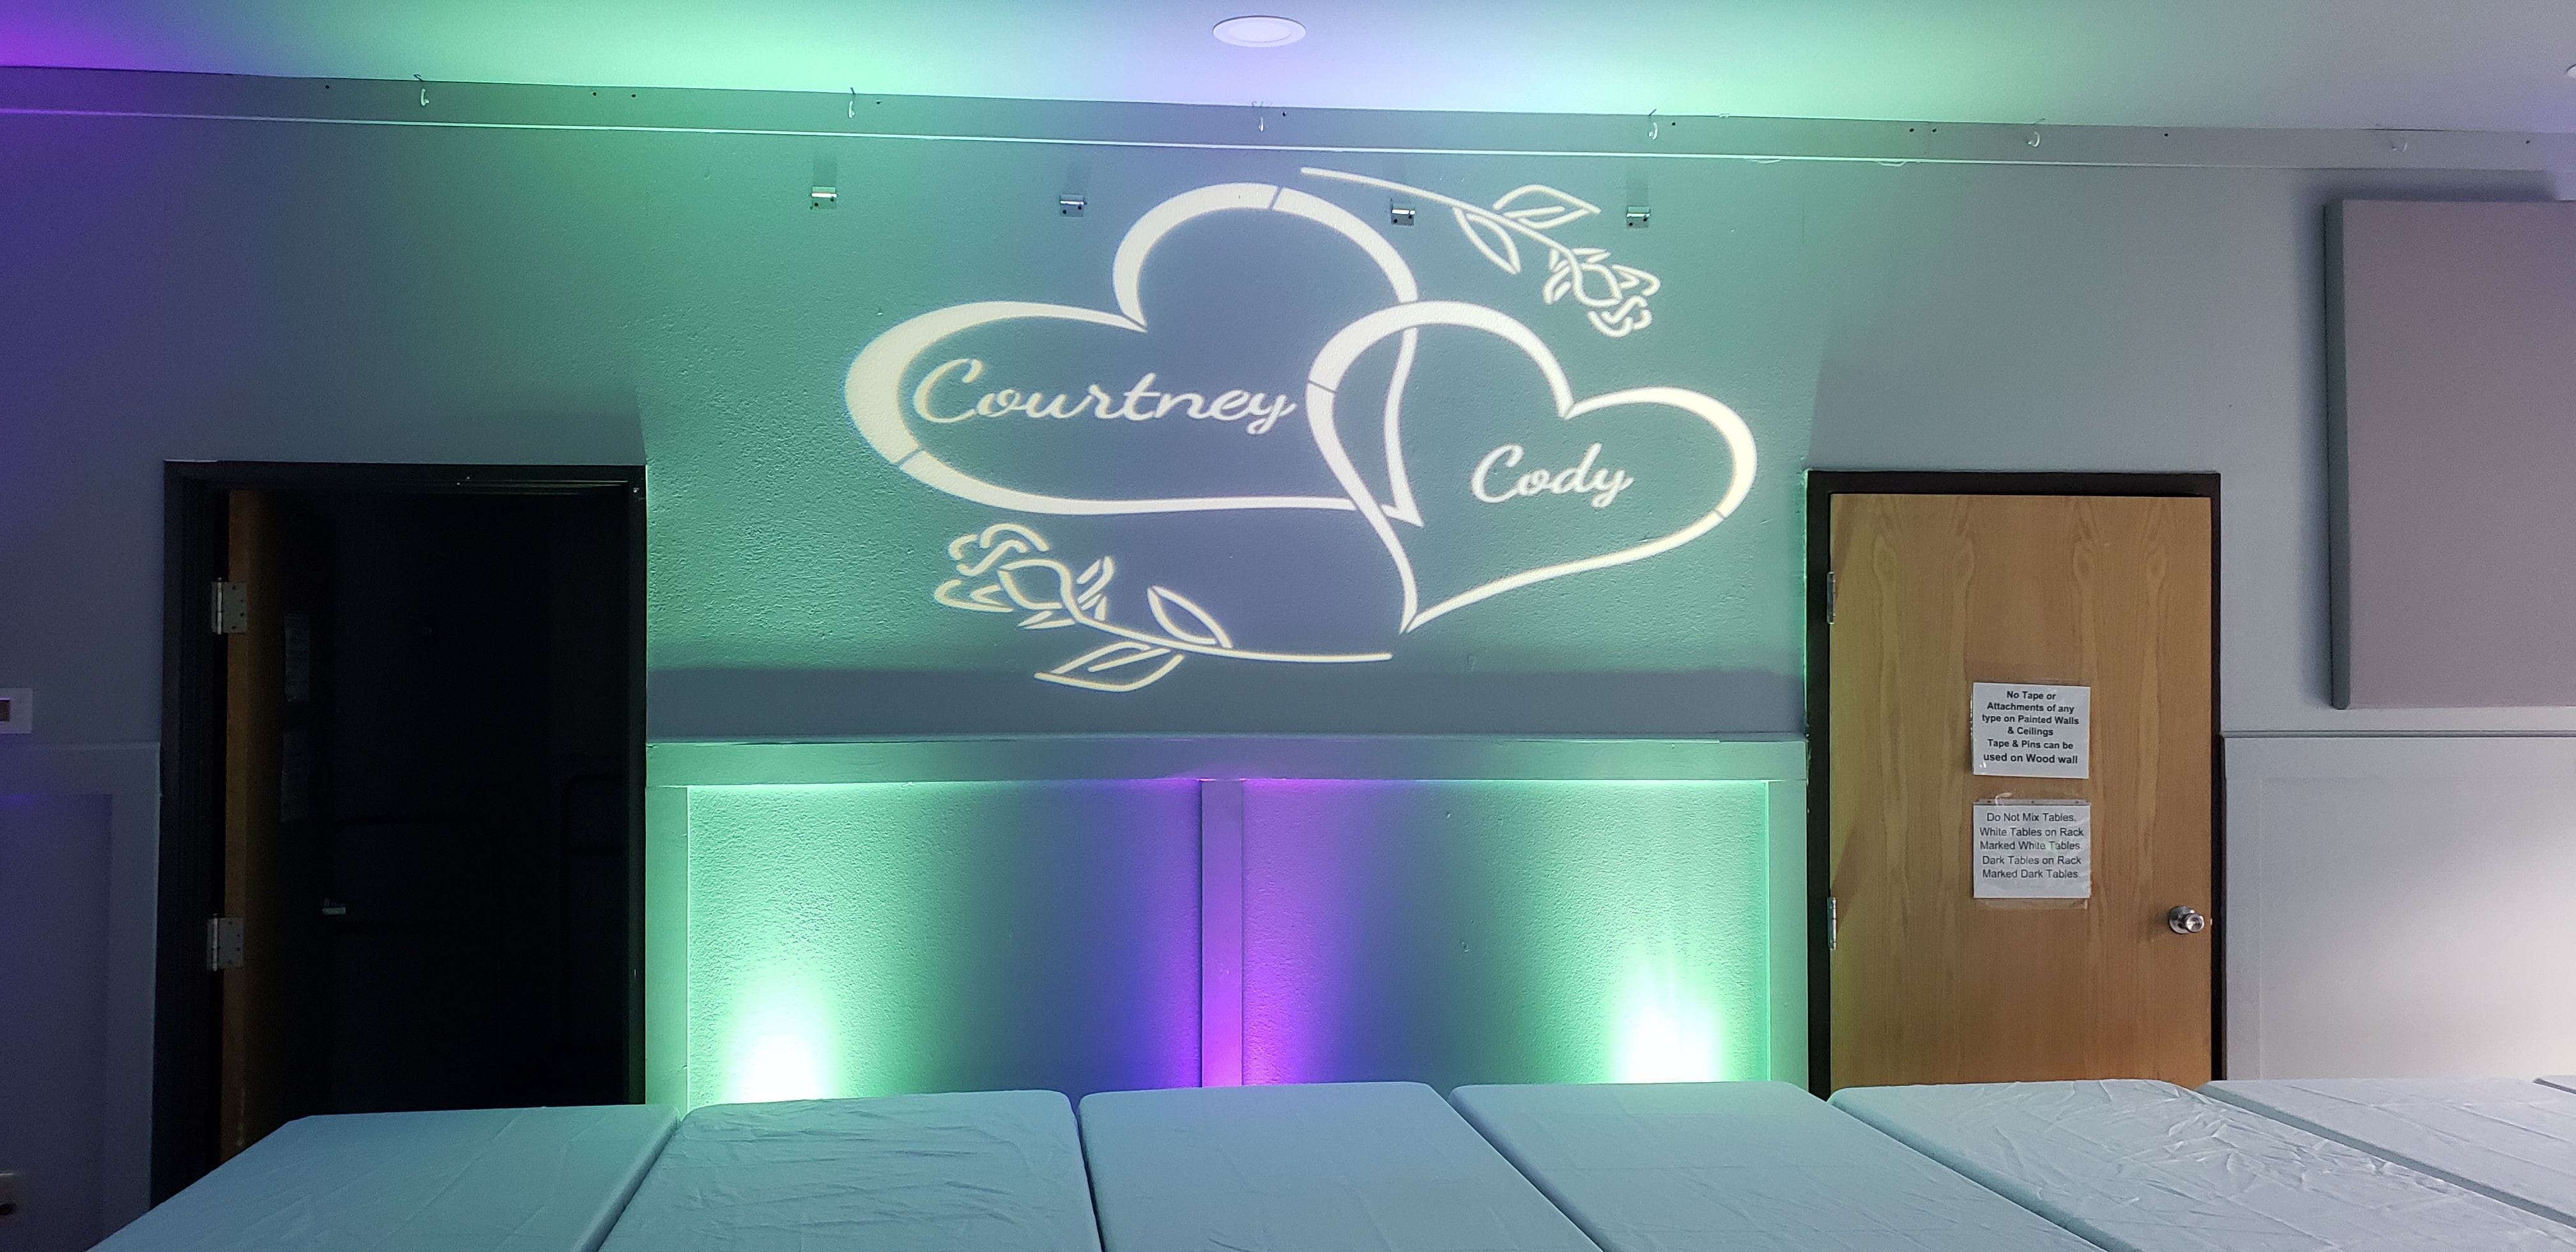 Wedding monogram at Billings Park with mint green and purple up lighting